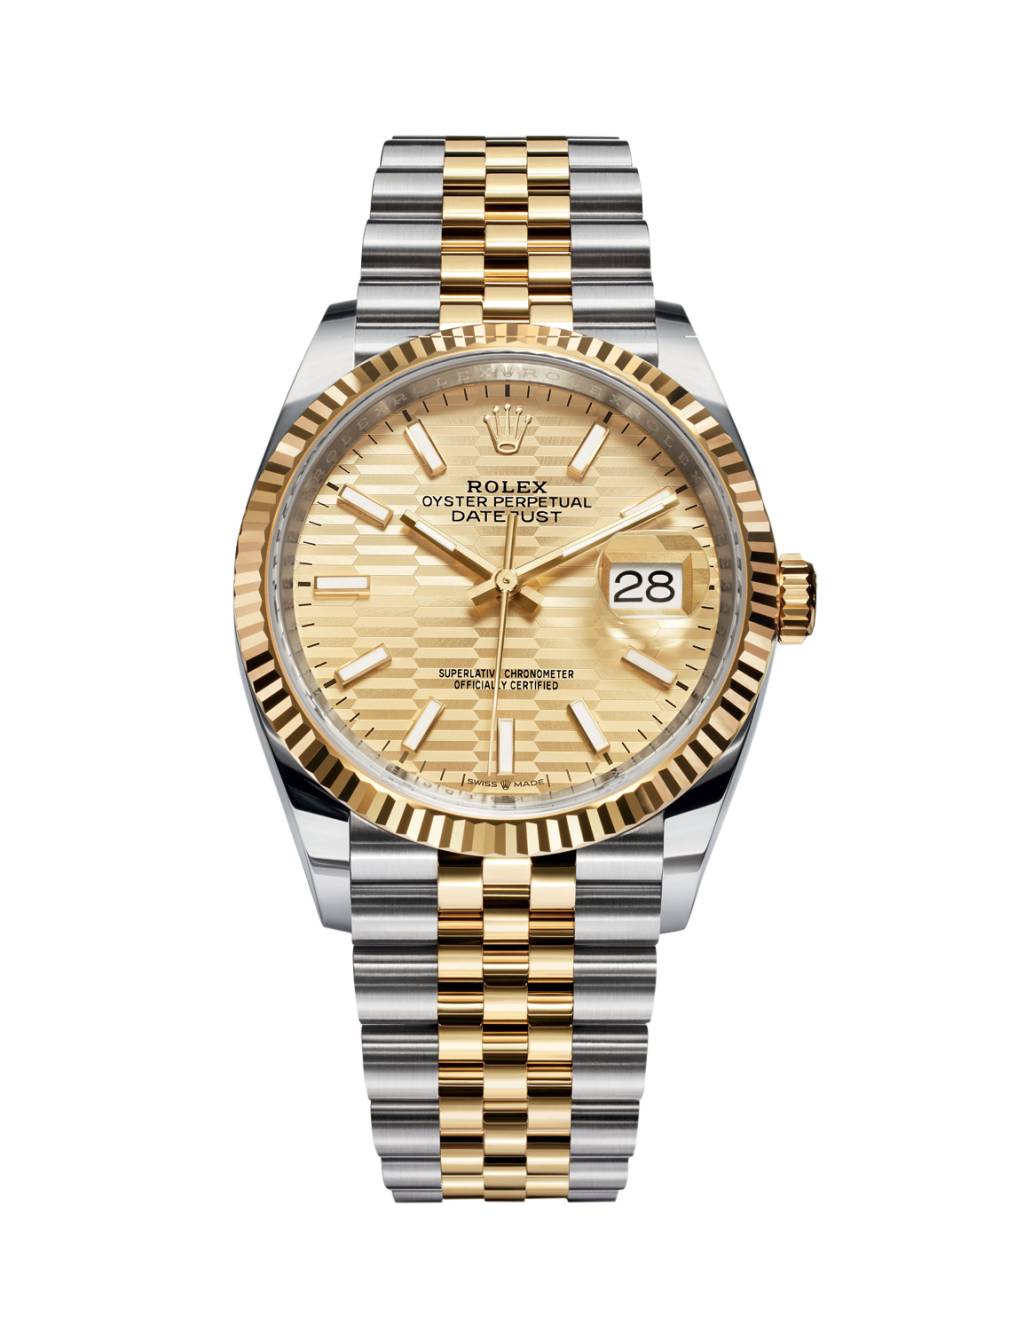 Crédito: Rolex/Ulysse Fréchelin Oyster Perpetual Datejust 36